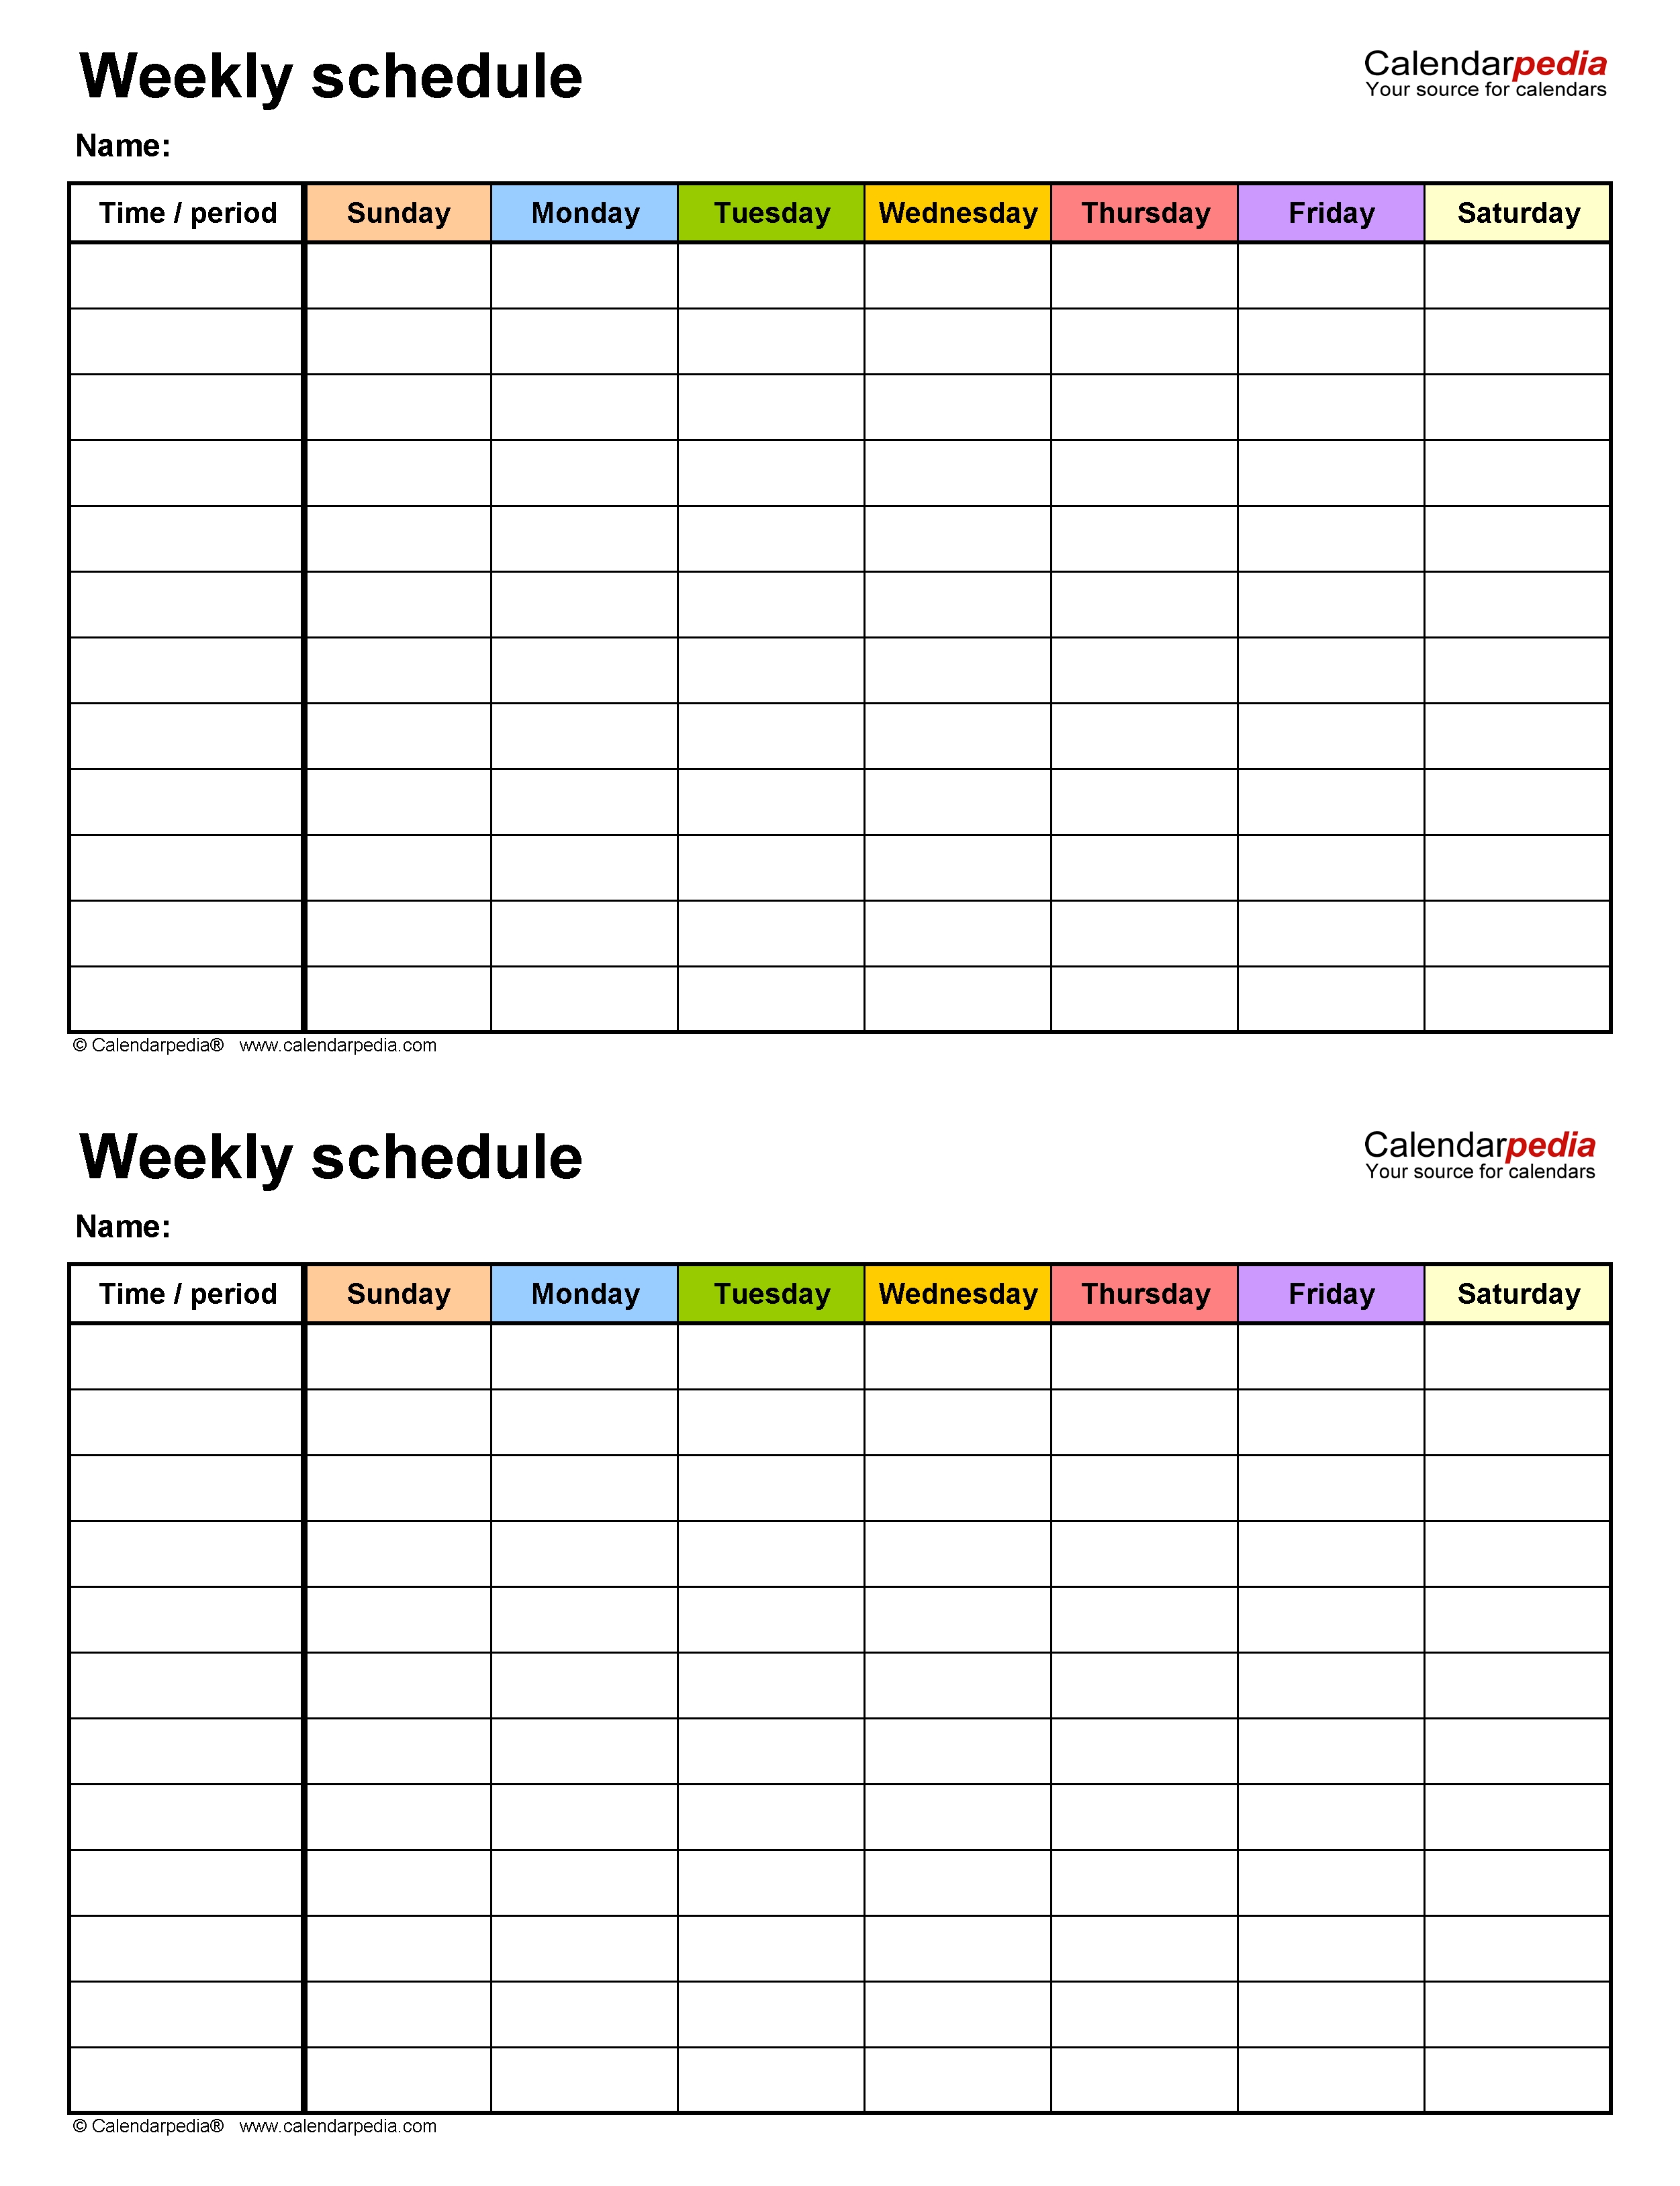 Free Weekly Schedule Templates For Excel - 18 Templates Calendar Template Excel 2007 Free